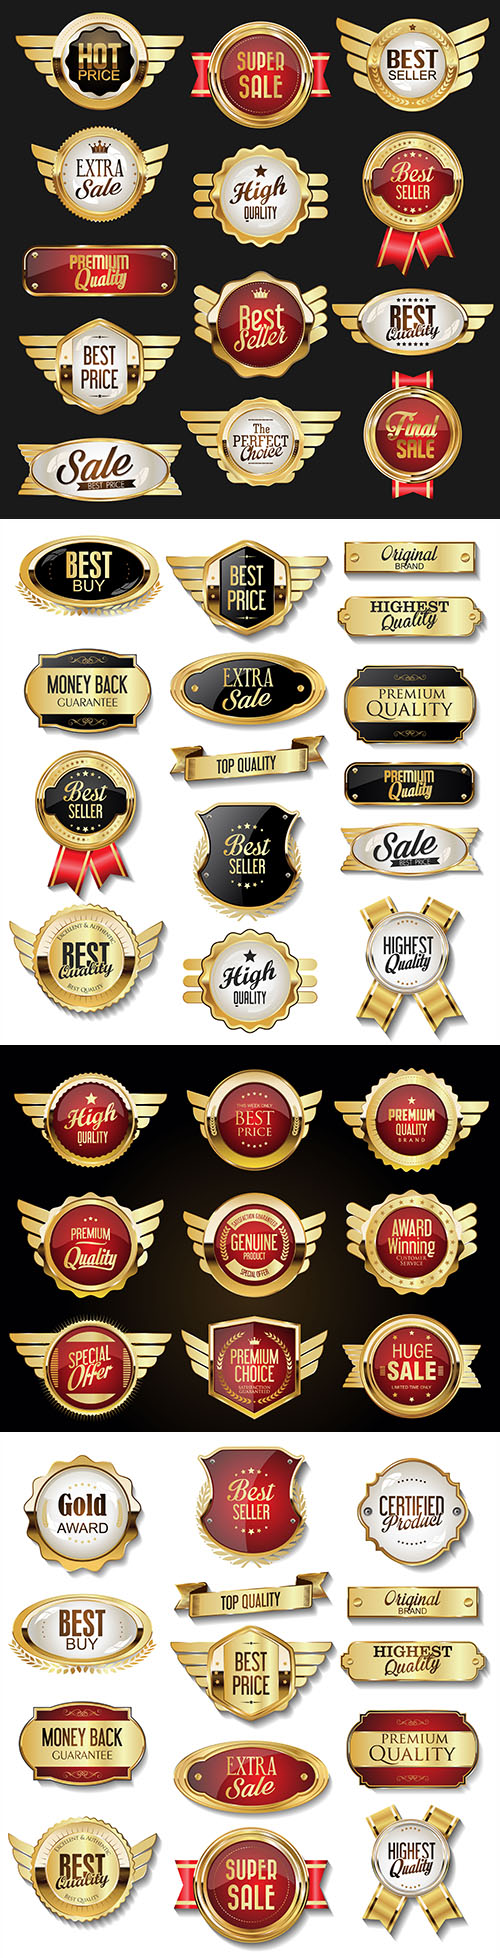 Luxury premium gold badges and labels collection 8
